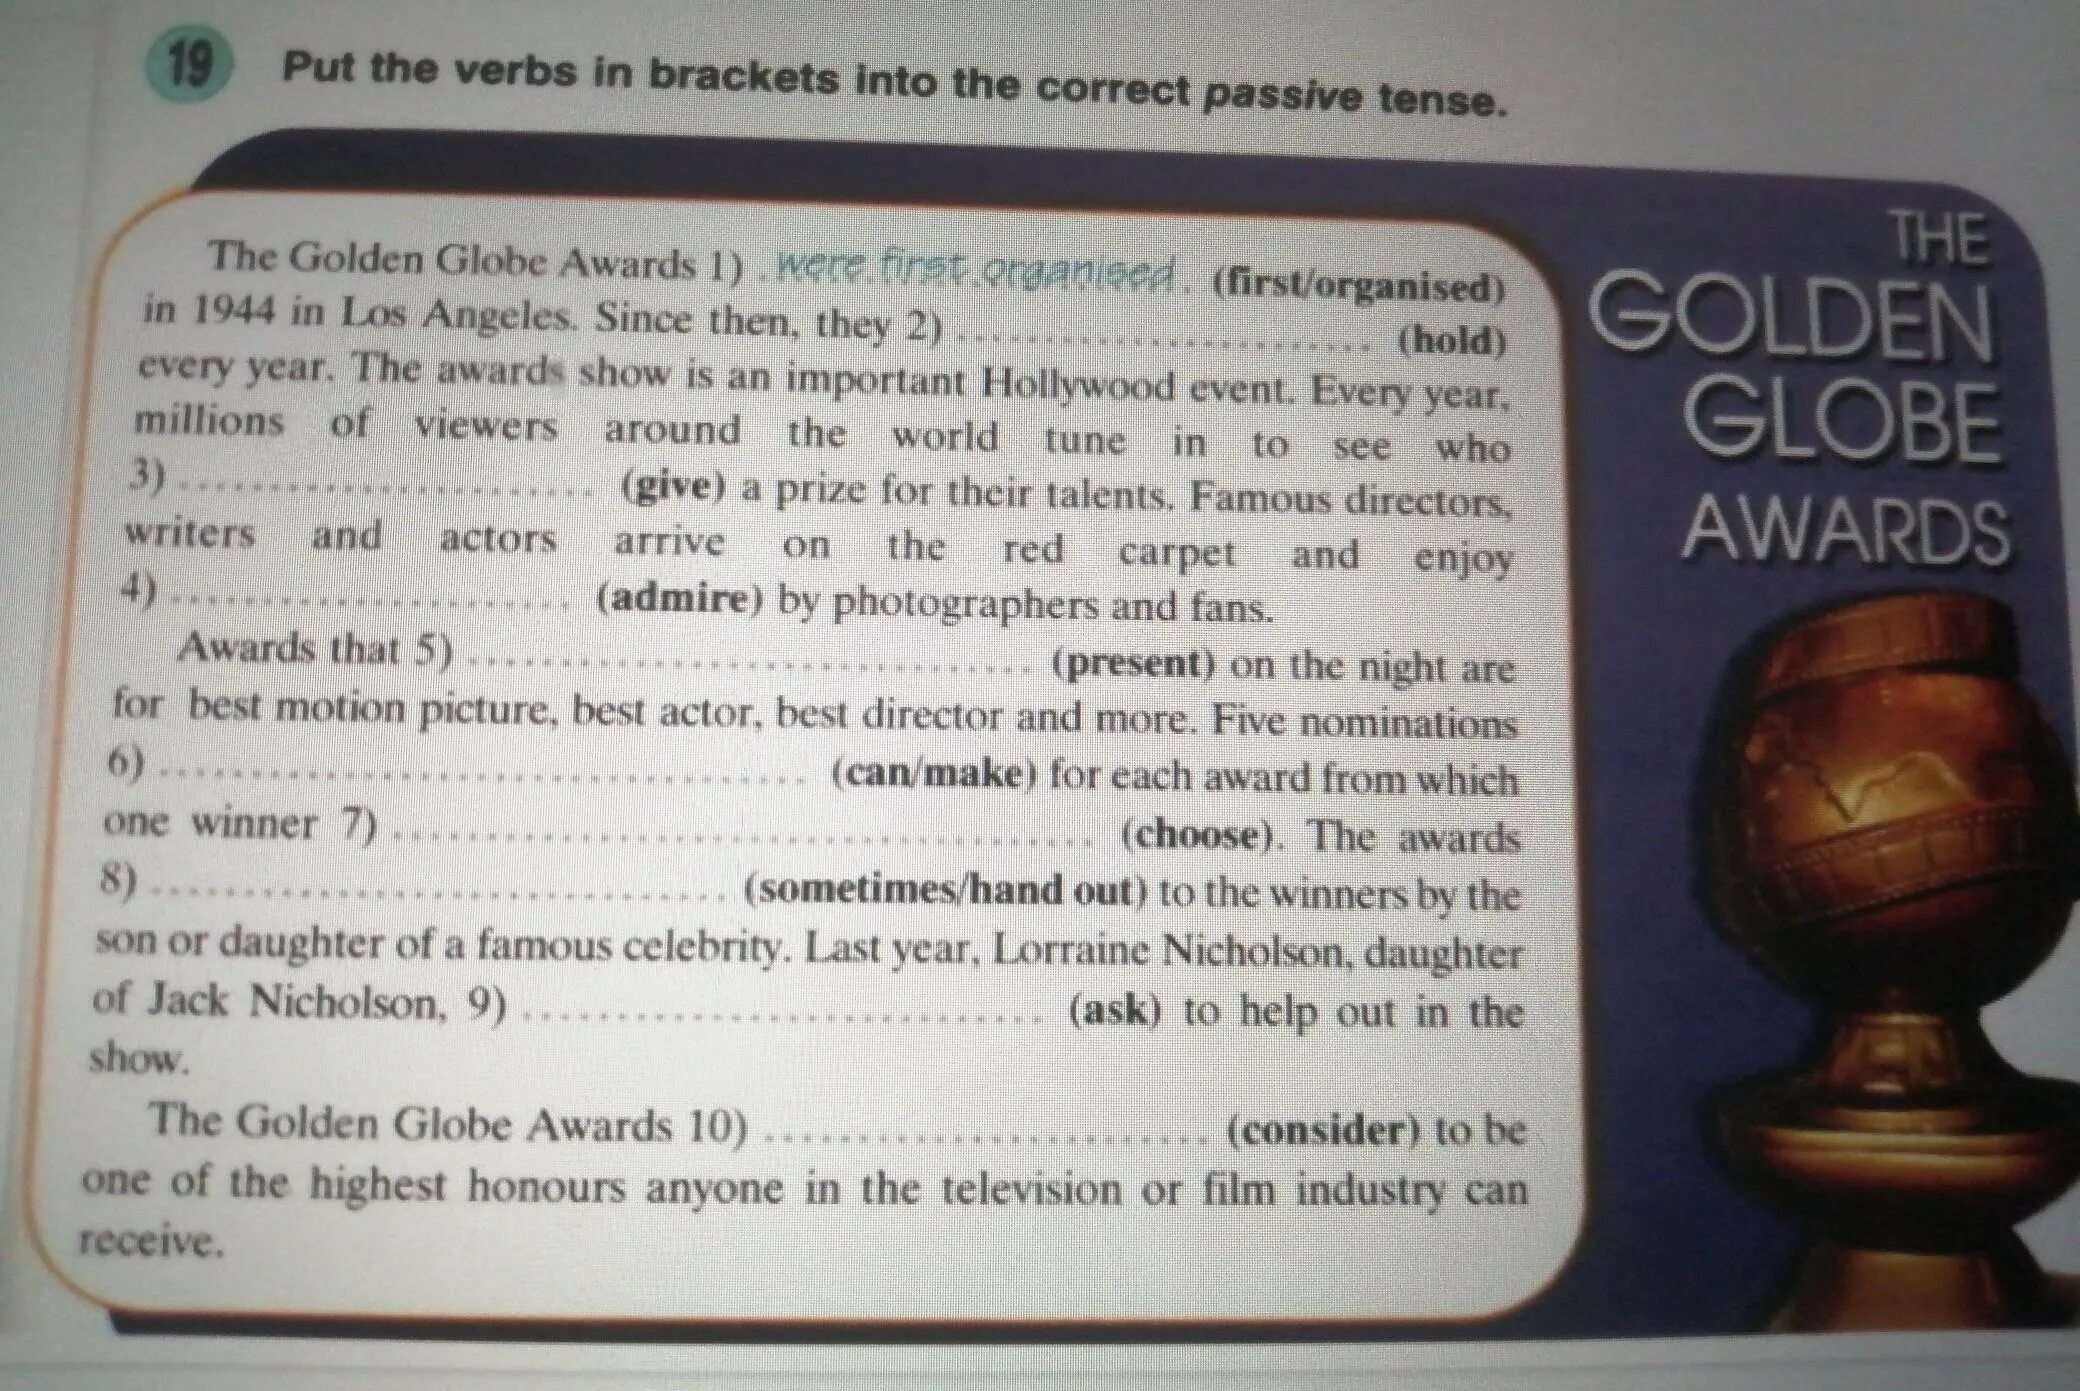 Put the verb into correct passive form. The Passive put the verbs in Brackets into the correct Passive form.. Put the verbs in Brackets into the correct Passive Tense. 1 Put the verbs in Brackets into the correct Passive. The Passive put the verbs in Brackets into the correct Passive form. The Golden Globe Awards.